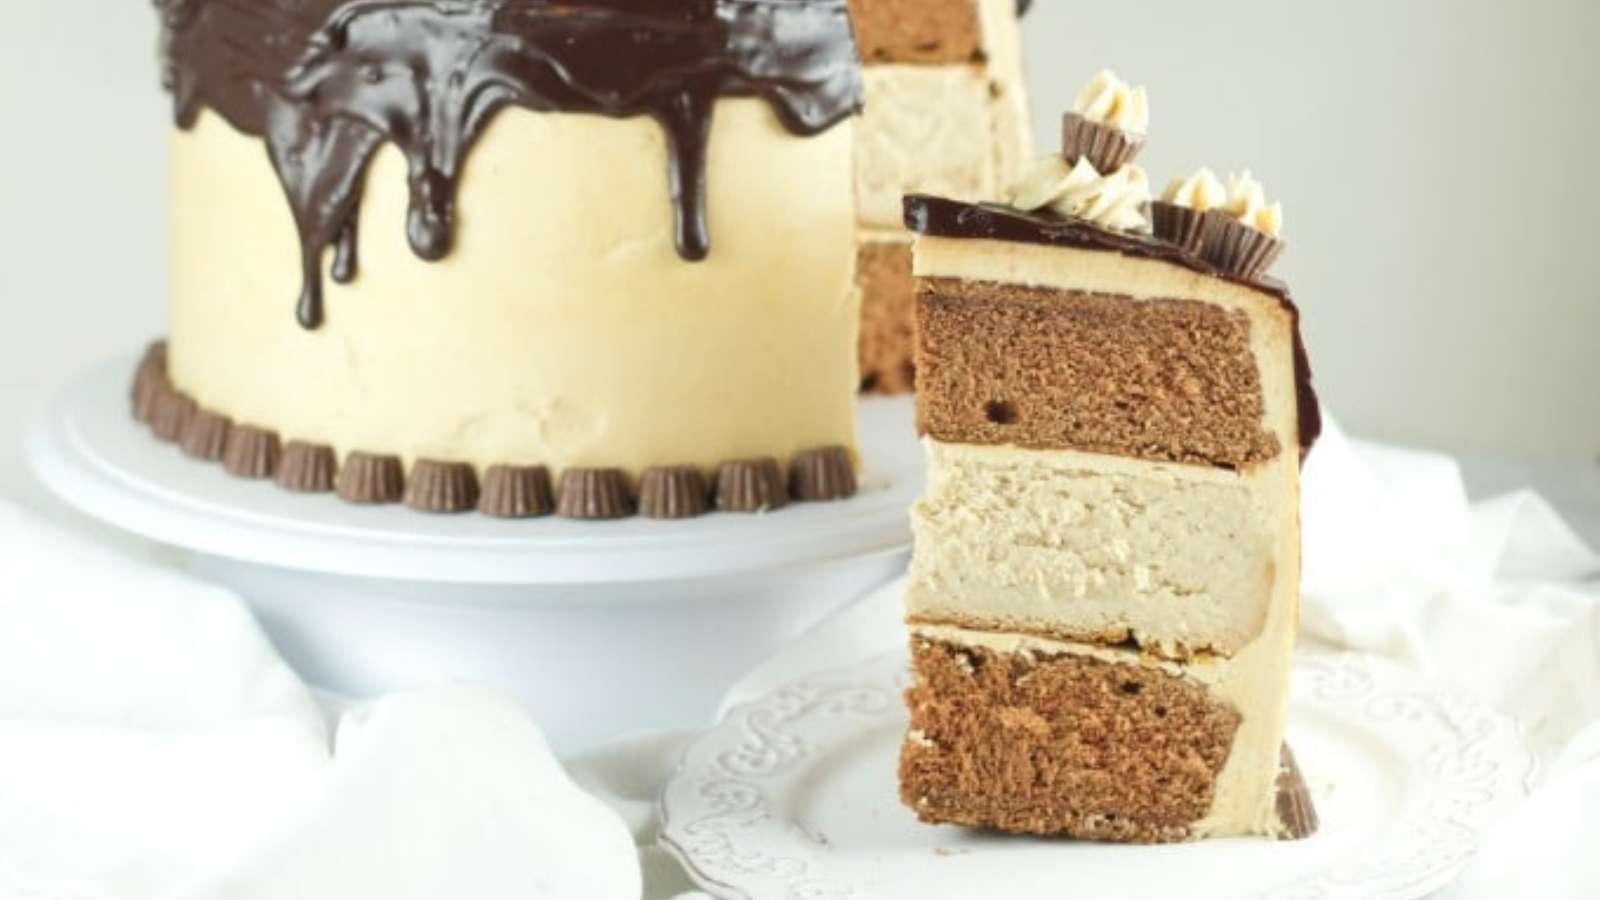 Chocolate Peanut Butter Cheesecake Cake recipe by Living Sweet Moments.